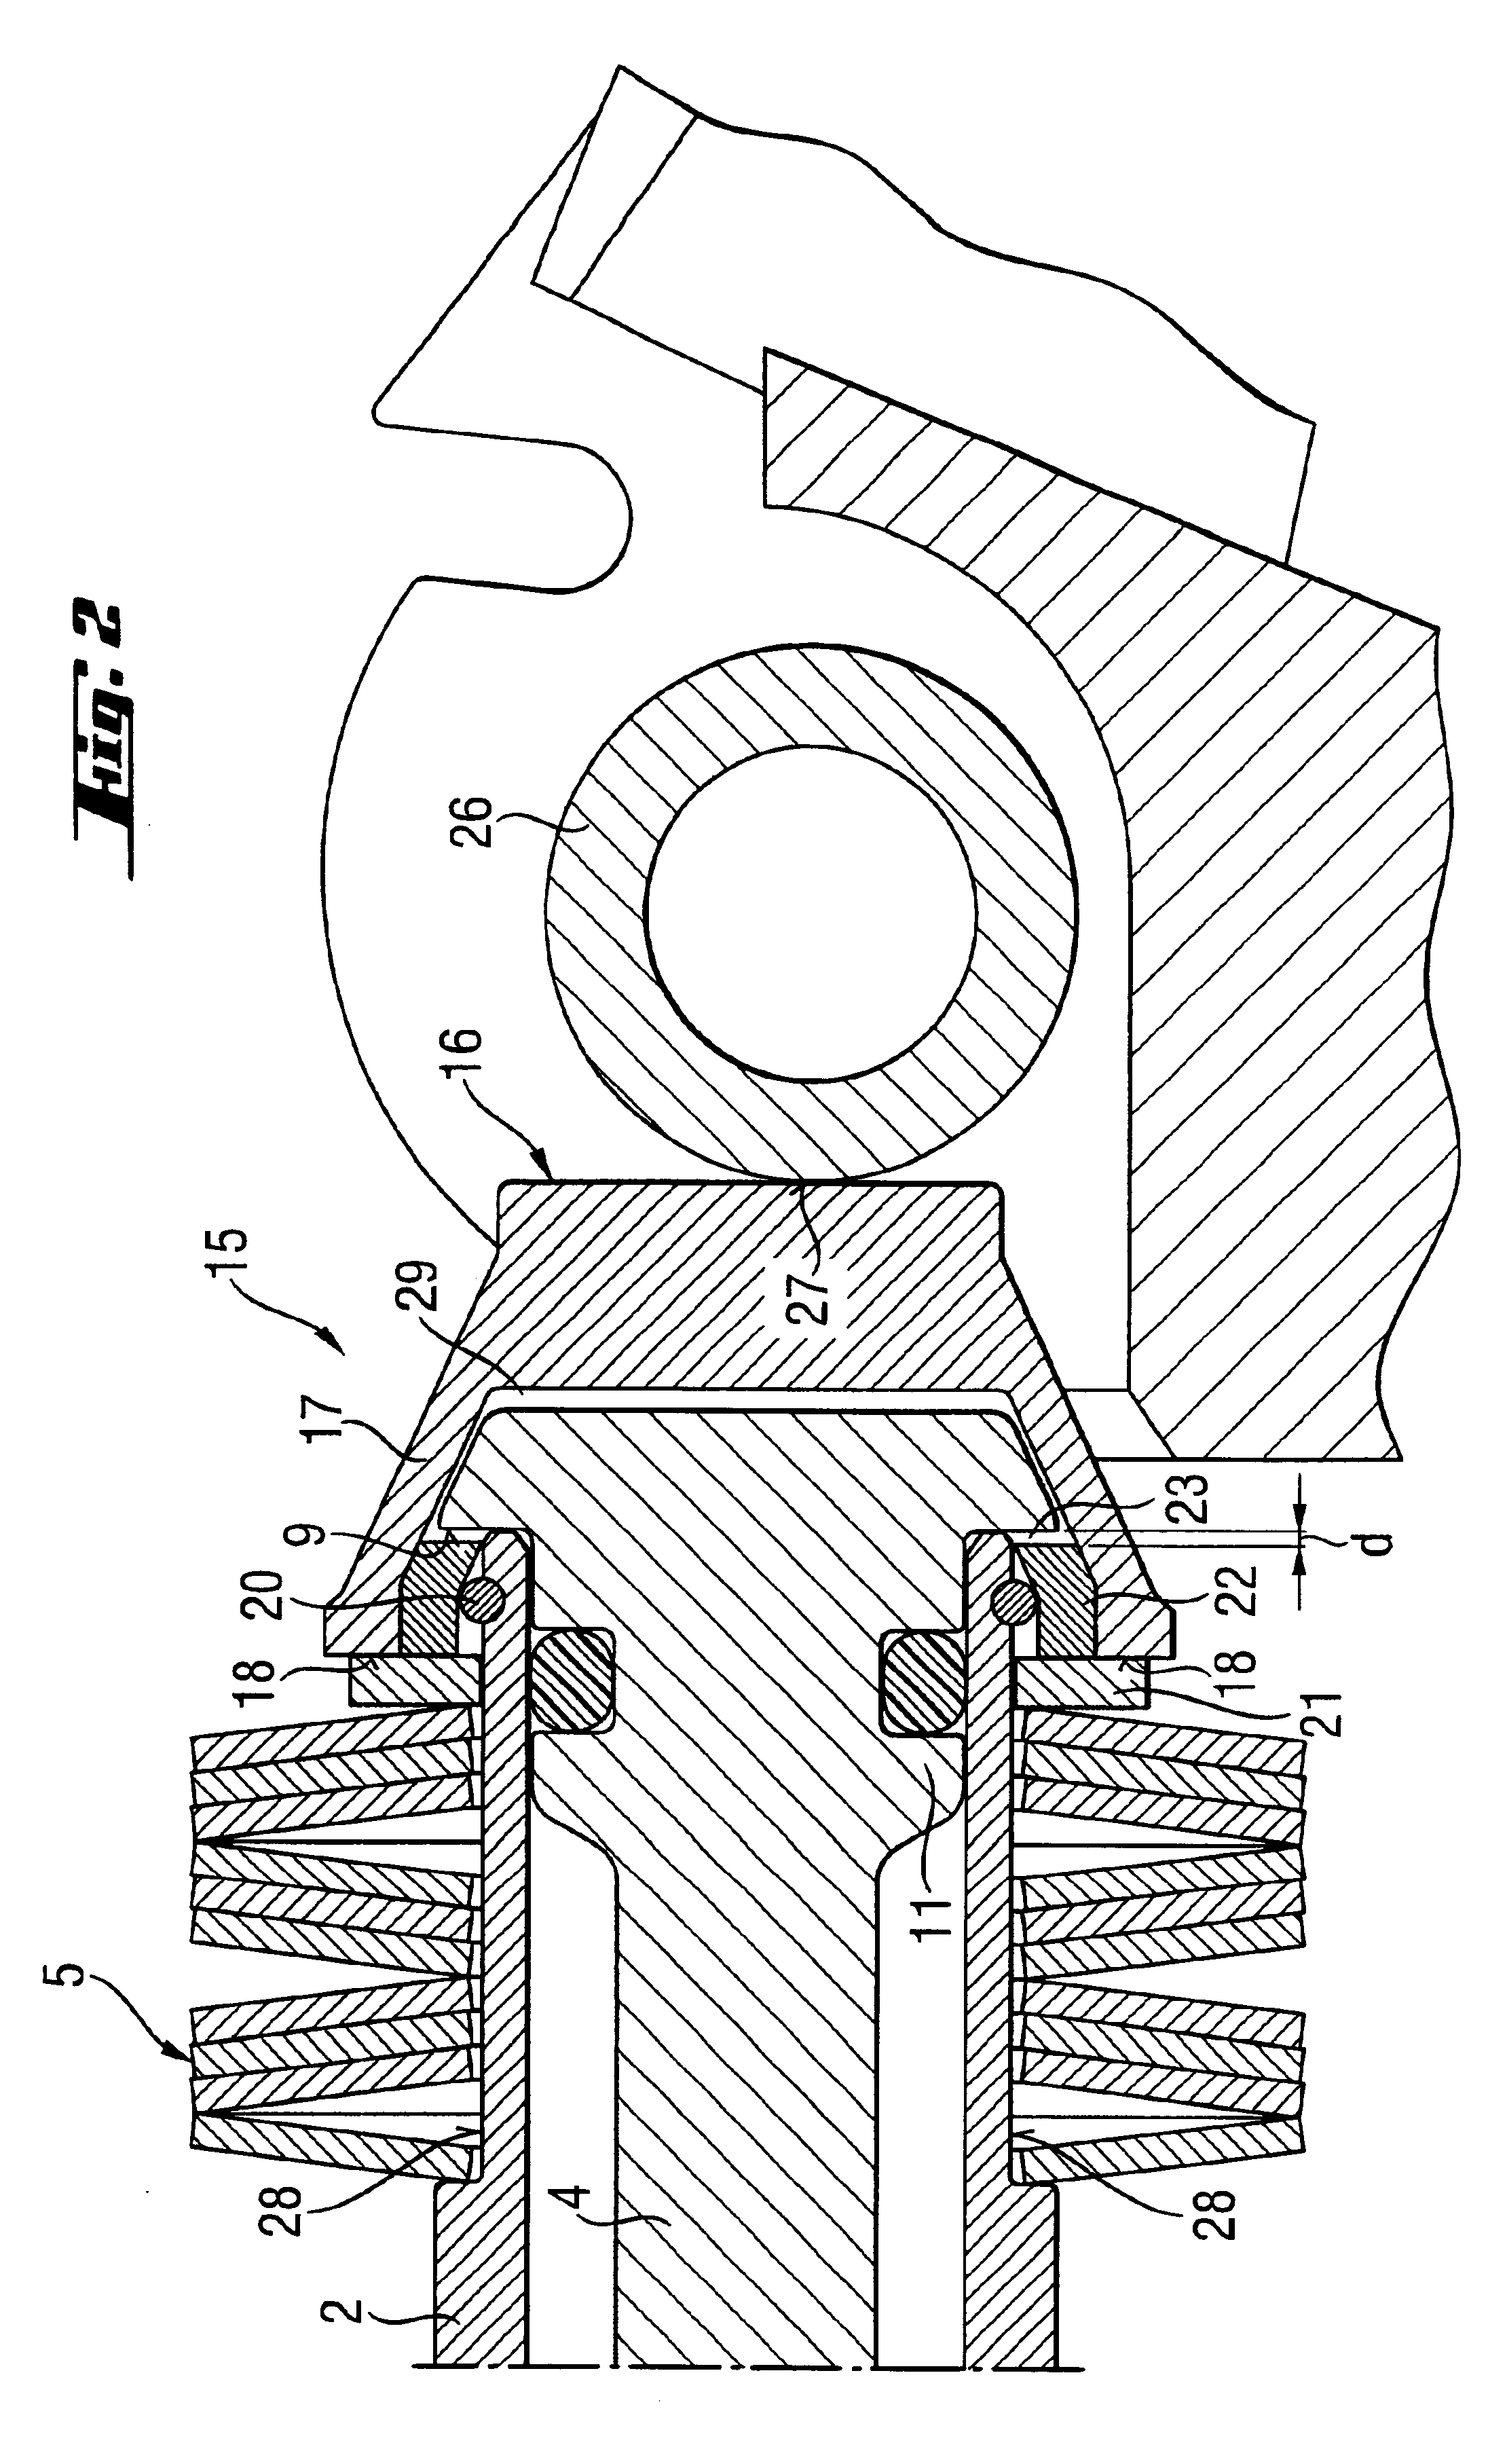 Electrical tool with a quick-action clamping device